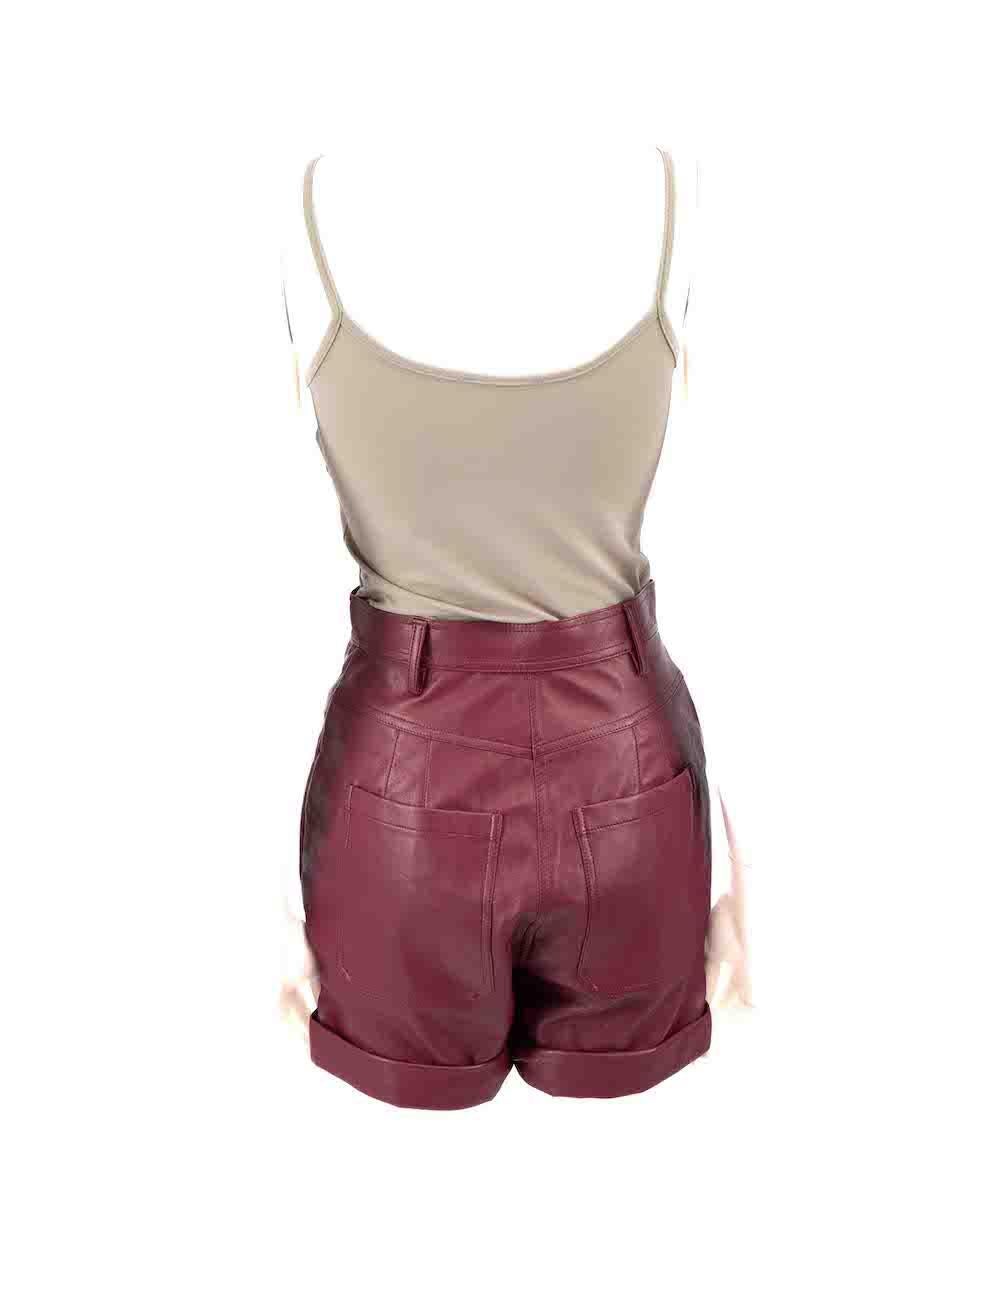 Philosophy di Lorenzo Serafini Burgundy Leather Pocket Shorts Size XS In New Condition For Sale In London, GB